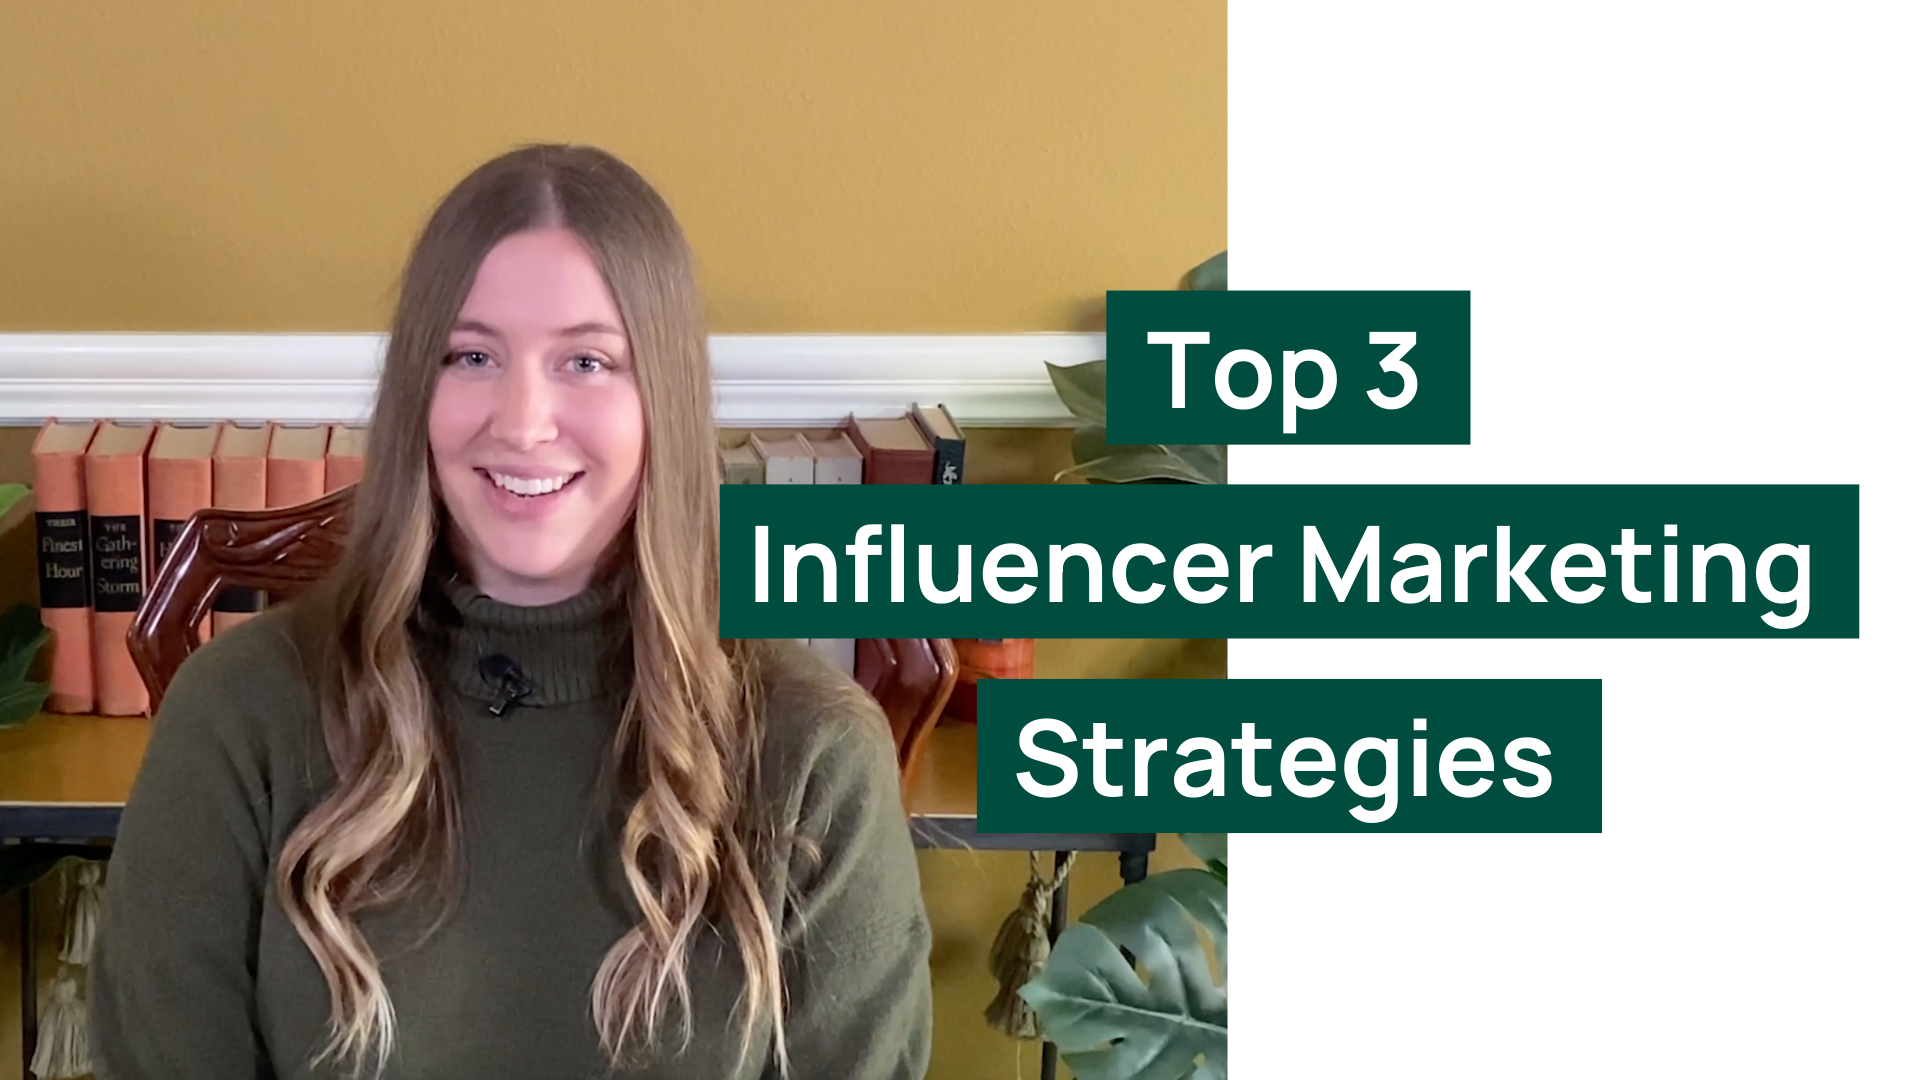 The Top 3 Influencer Marketing Strategies to Drive Sustainable Growth